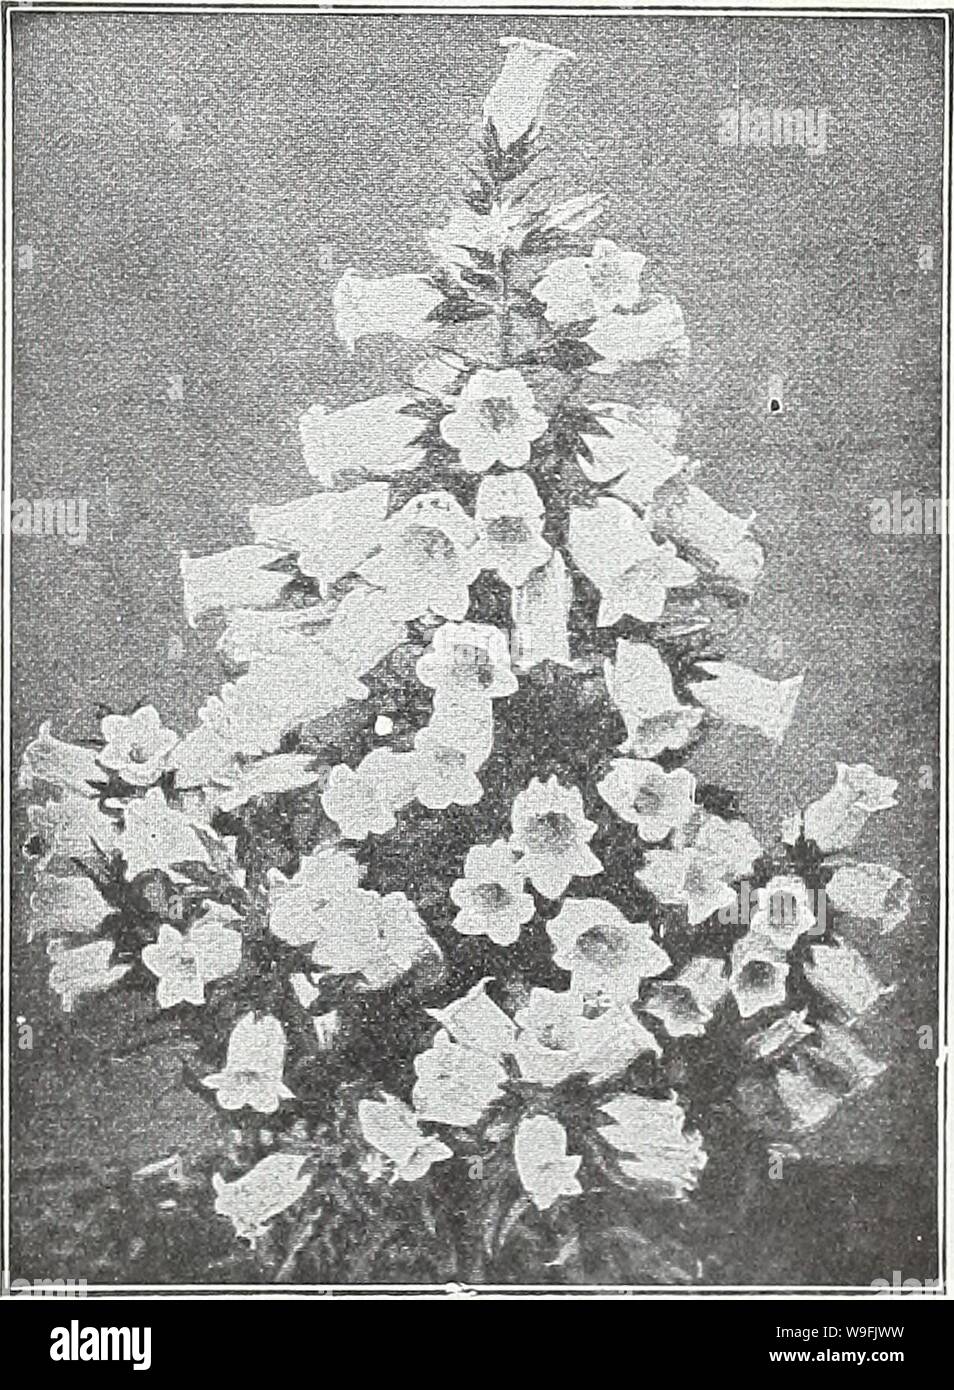 Archive image from page 48 of Currie's garden annual  spring. Currie's garden annual : spring 1934 59th year  curriesgardenann19curr 0 Year: 1934 ( BOLTONIA (False Chamonile) Showy plants, bearing single aster-like flowers in great abundance. ASTEROIDES—Pure white. LATISQUAMA—Lavender Pink. Plants, price, each, 25c; per dozen, $2.50. BUDDLEIA (Butterfly Bush, or Summer Lilac) large spikes of dark blue flowers. Plants, HARDY BORDER CARNATION Perennial varieties blooming from the seed the second year after sowing. Seed sown in spring will produce strong plants in fall, which can be left in the o Stock Photo